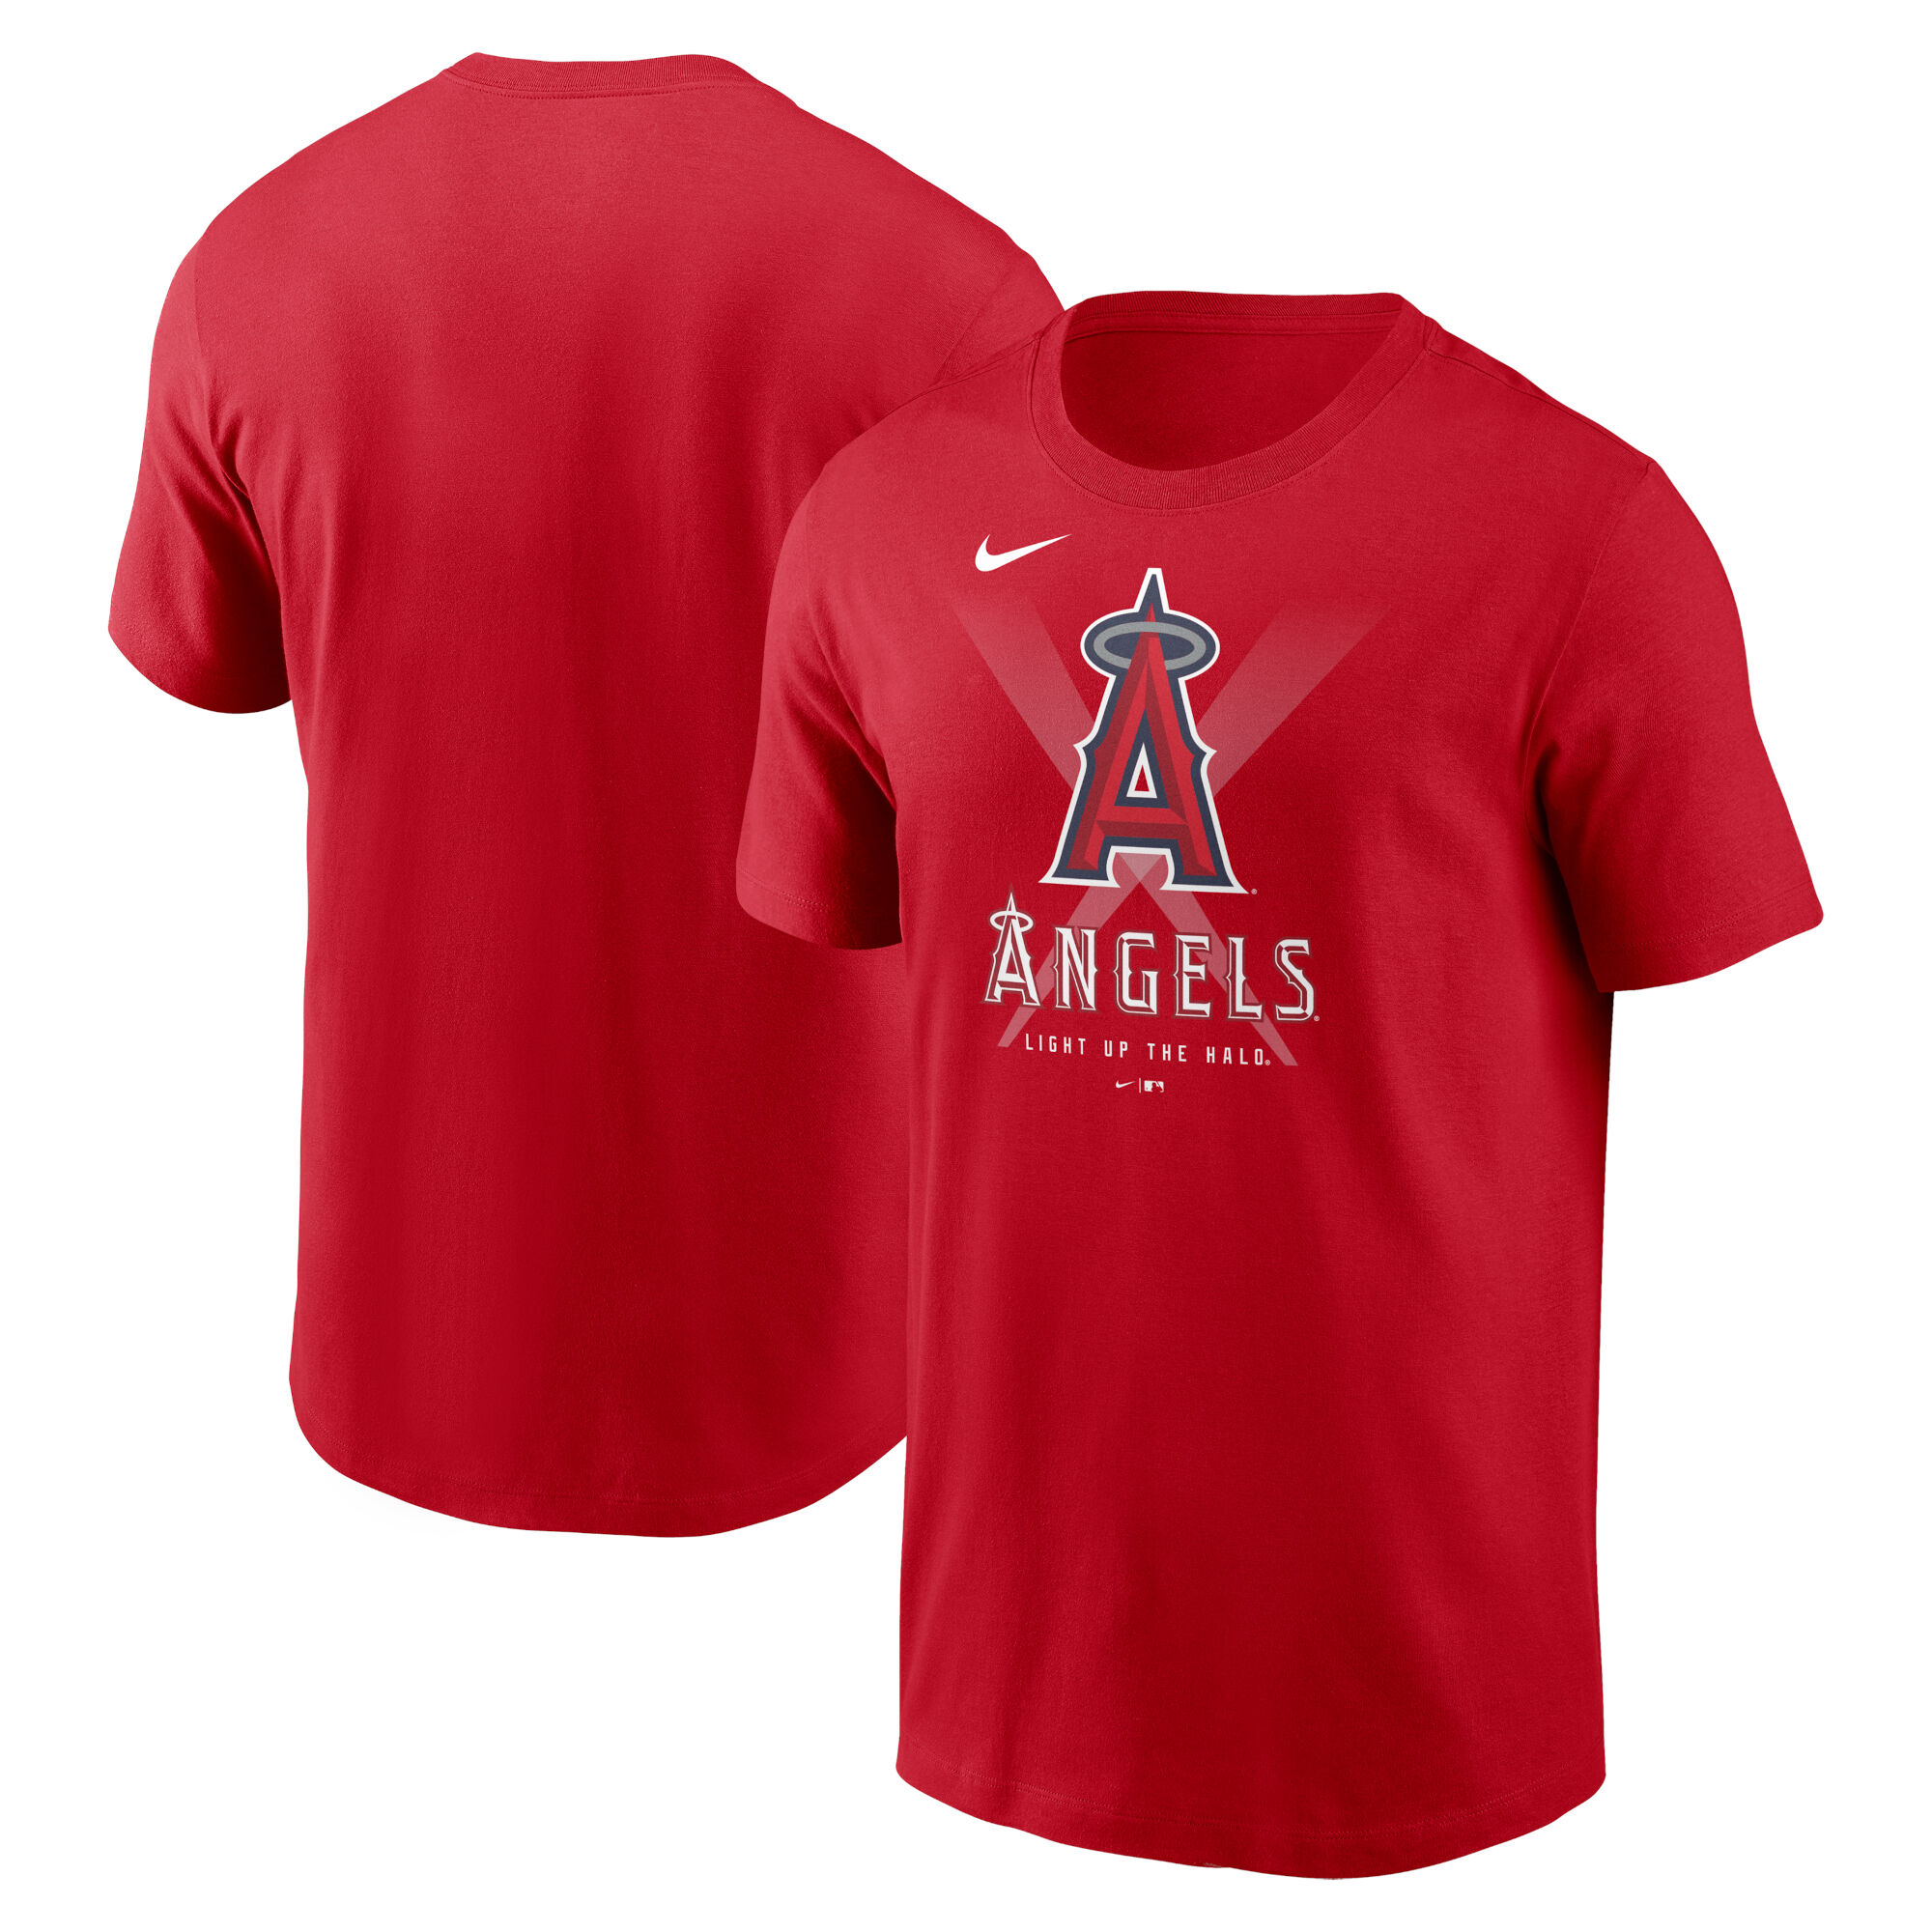 Men's Nike Red Los Angeles Angels Light Up the Halo Local Team T-Shirt - Male - Red